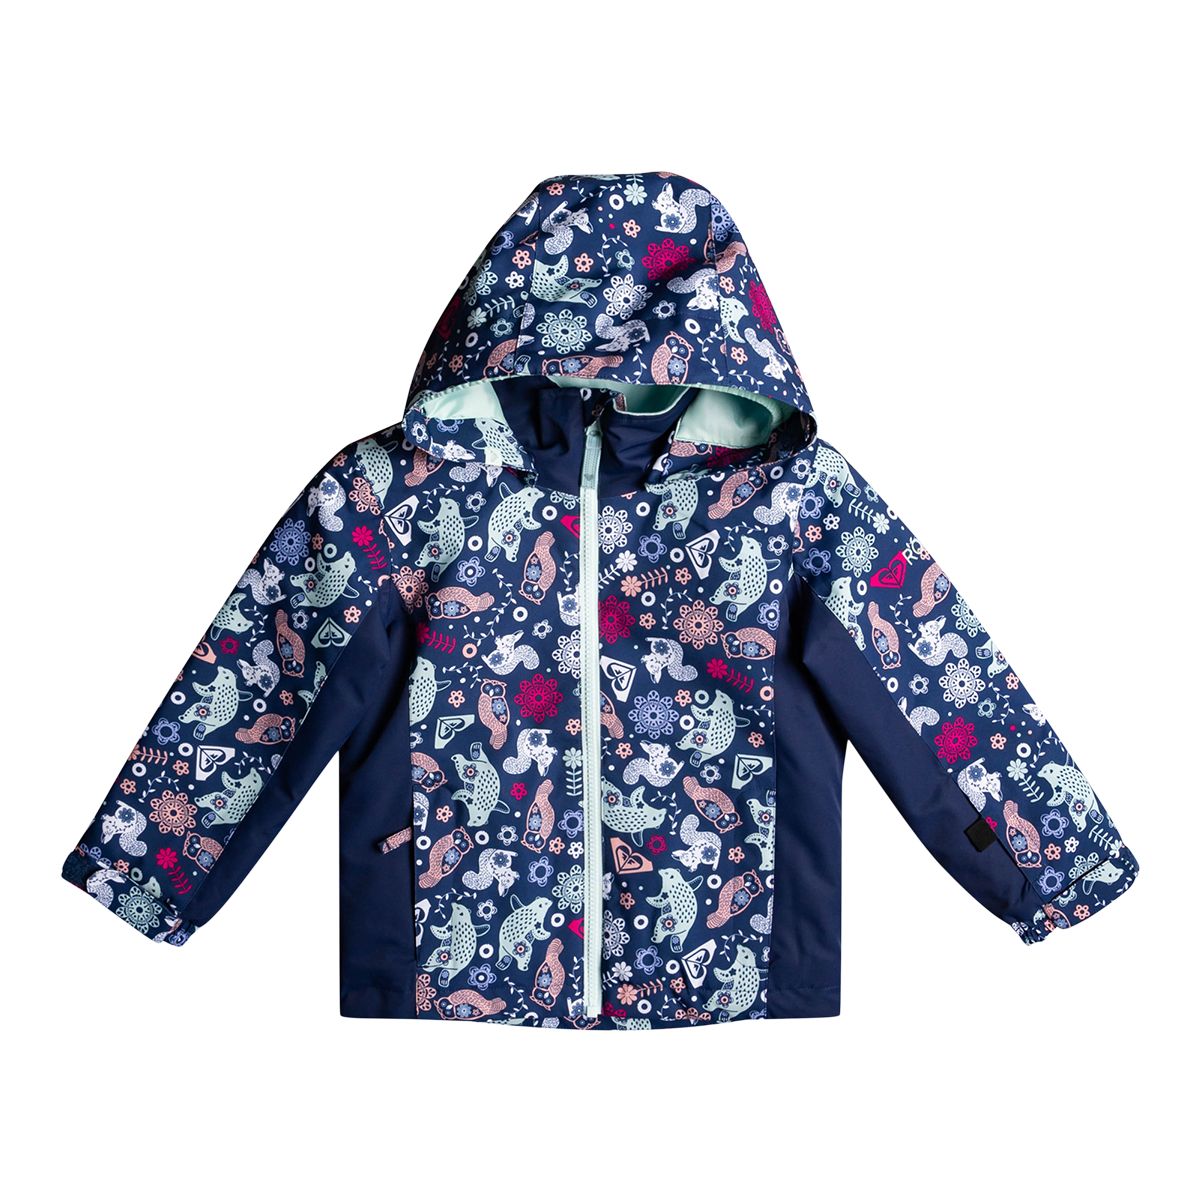 Roxy Toddler Girls' Snowy Tale Insulated Jacket